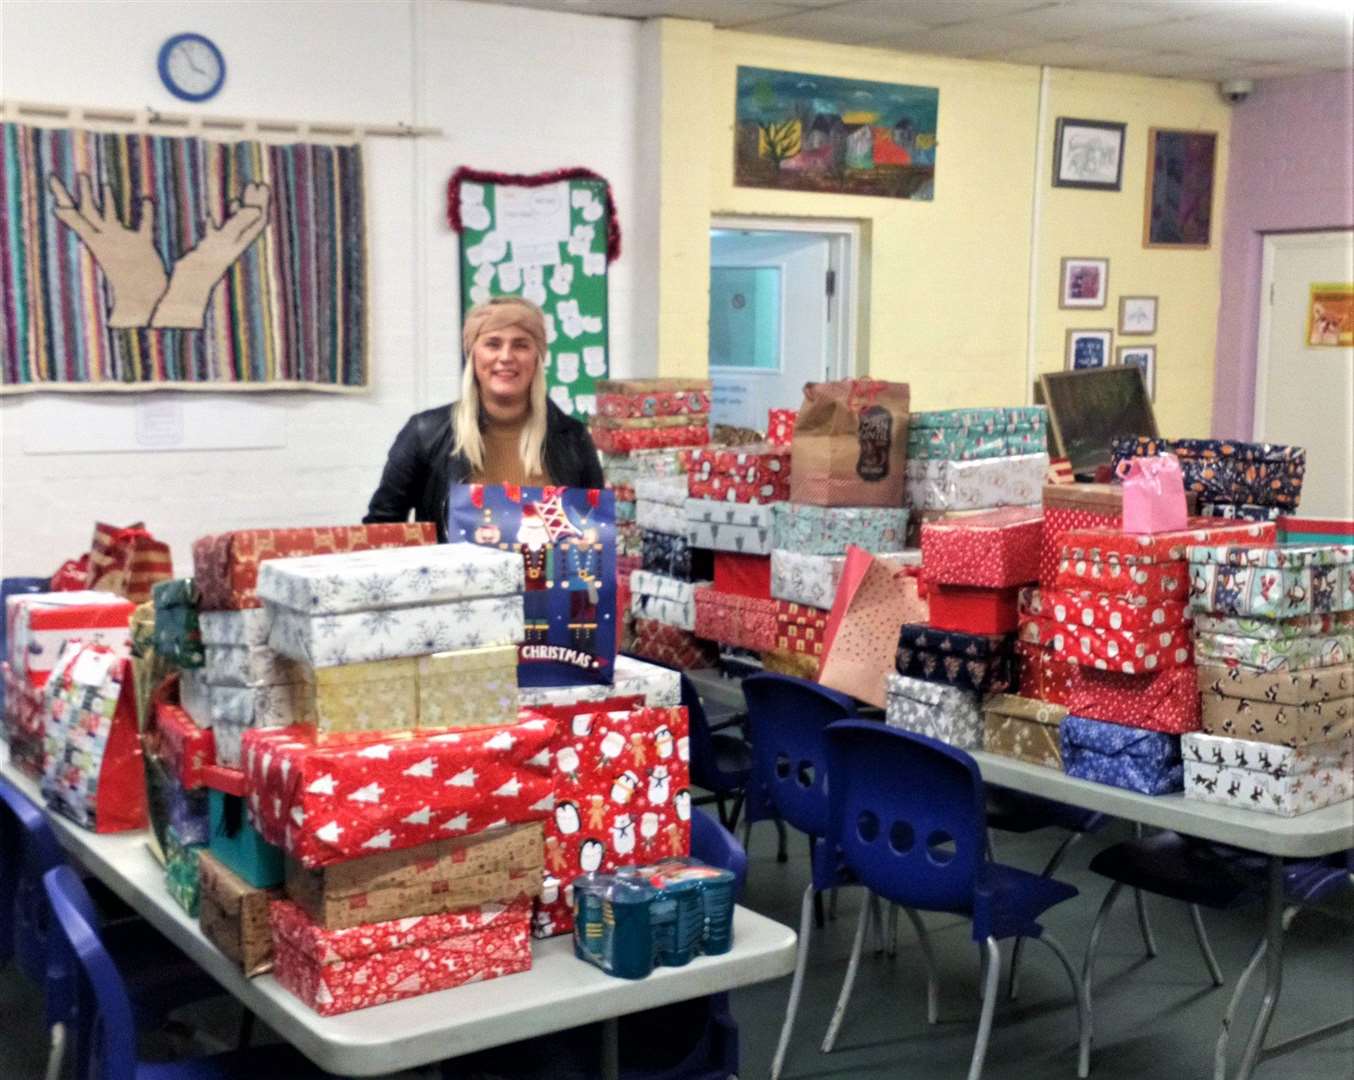 Jaymie Dunster's Christmas shoebox campaign in aid of the Catching Lives shelter in Canterbury has been altered for 2020